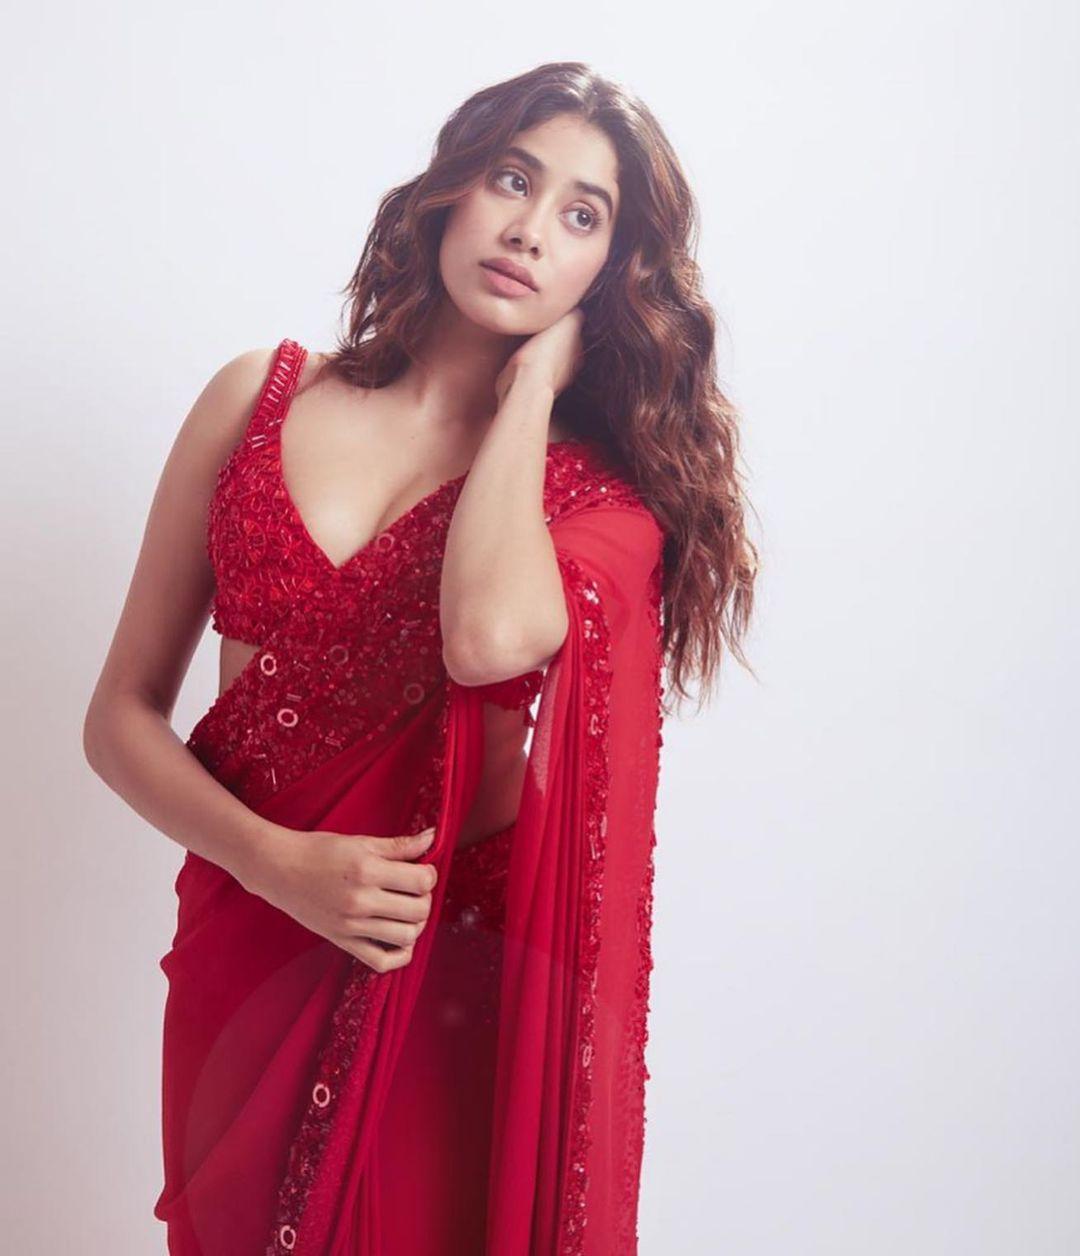 The georgette saree boasts a semi-sheer silhouette, adorned with delicate lace-trimmed floral borders and shimmering red sequin embellishments.